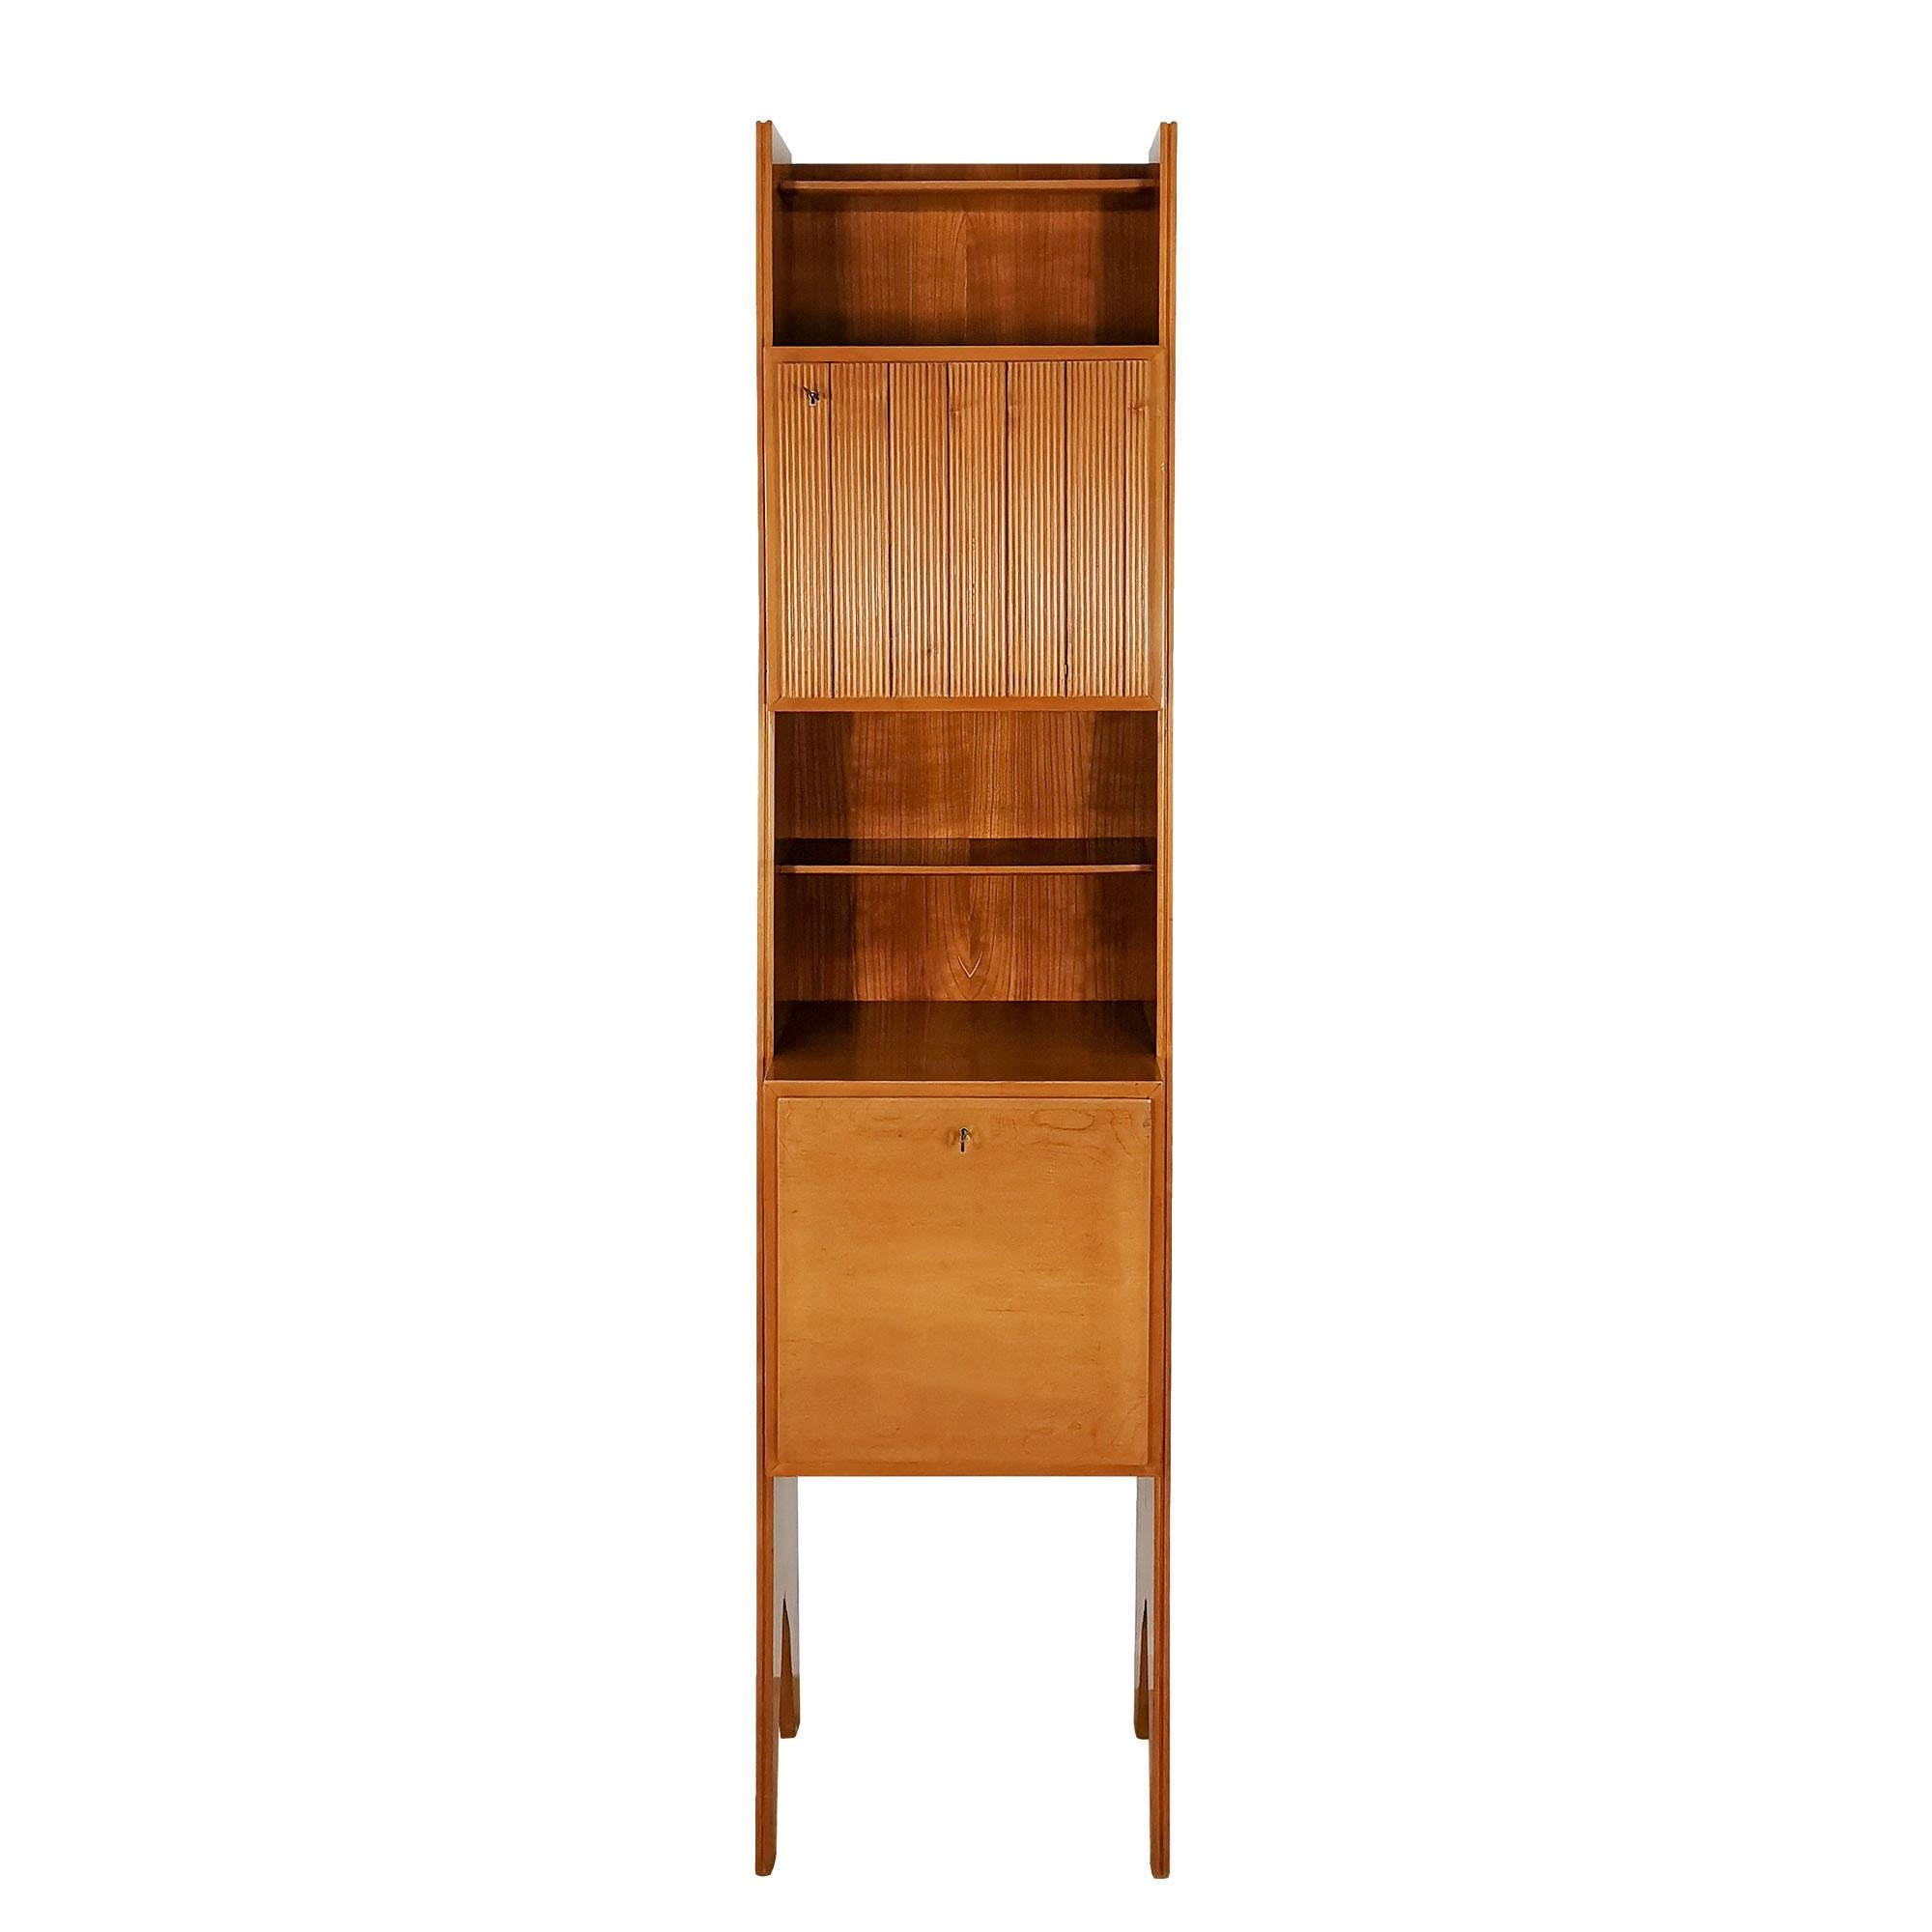 Cherry wood bookcase with shelves, one door with grissinis decoration and one flap door.

Italy c. 1950.